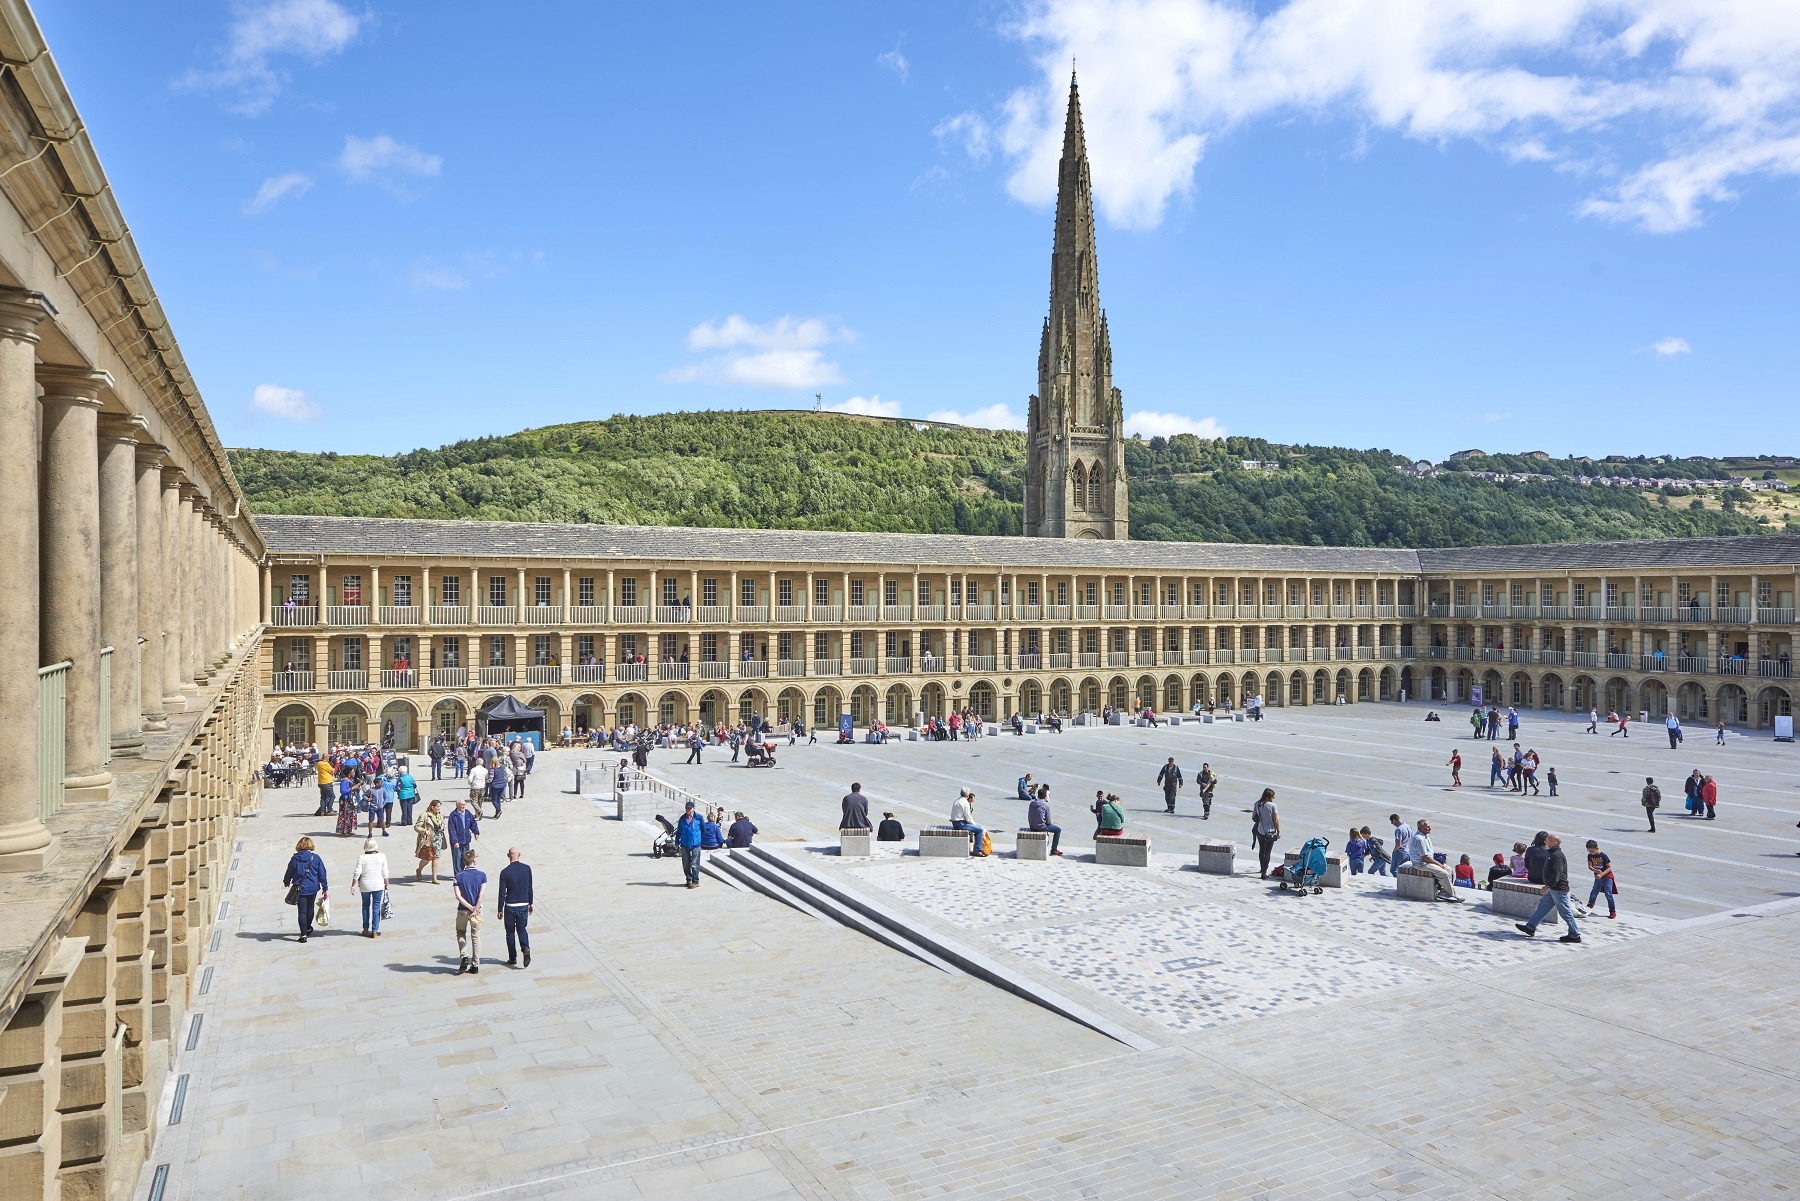 The Piece Hall - credit Paul White Photography